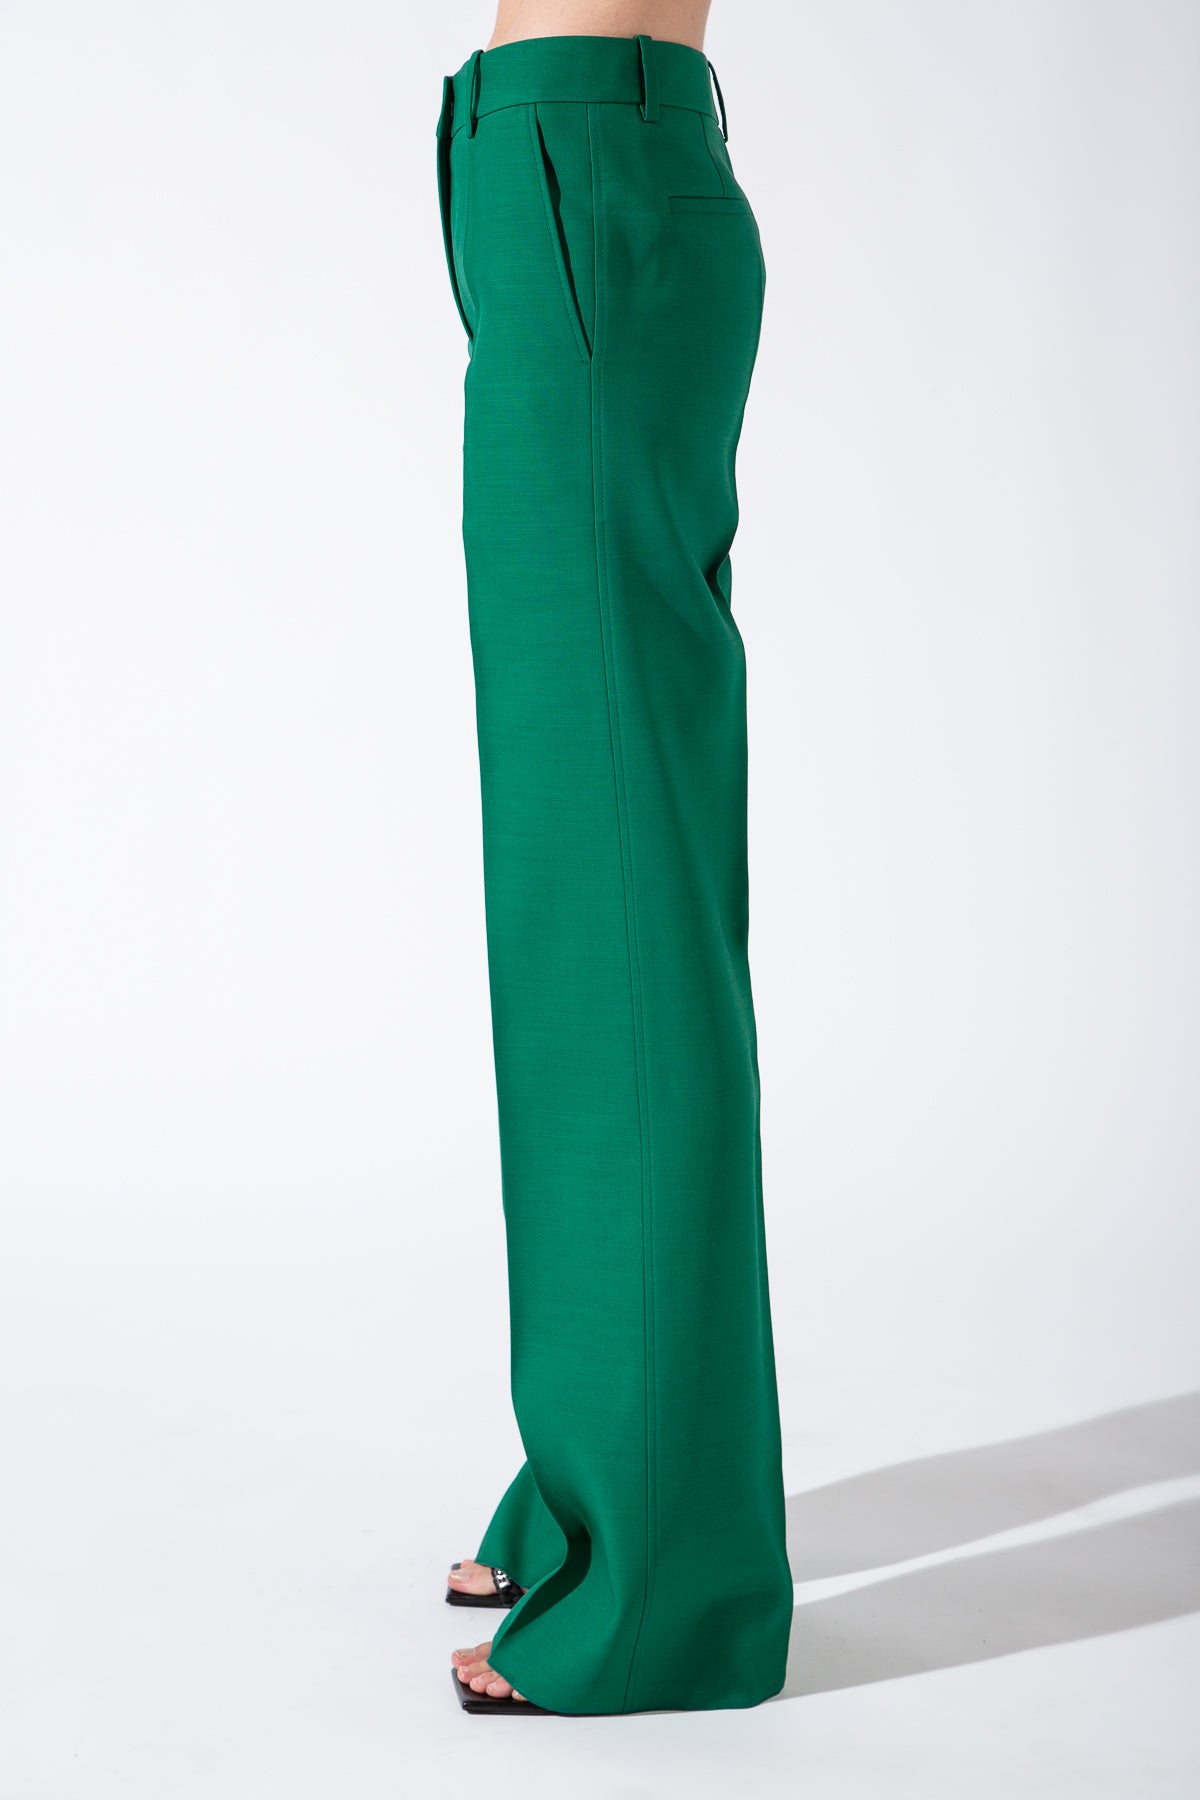 VALENTINO | SUITING PANTS